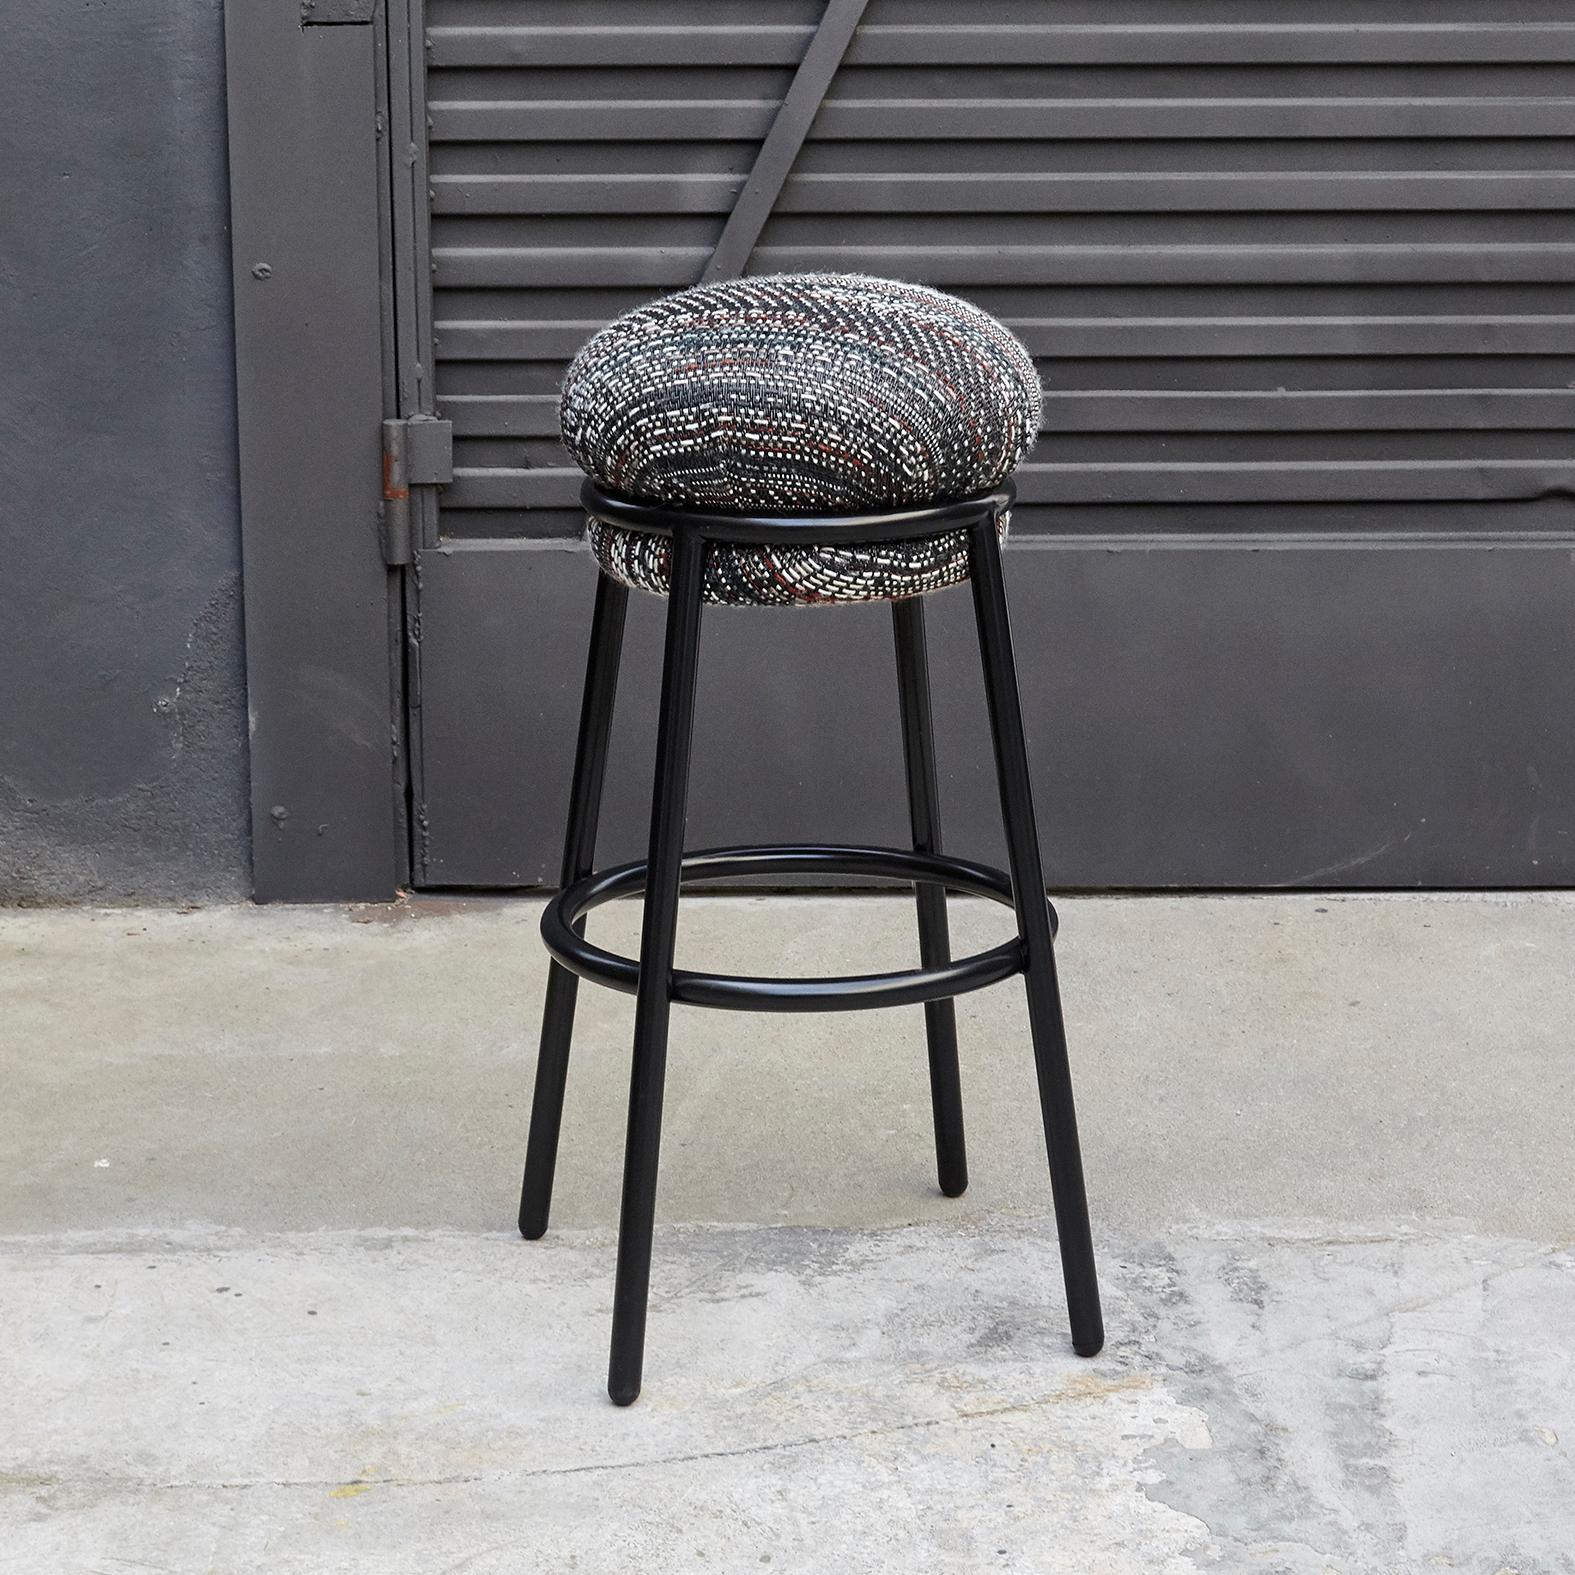 Modern Stephen Burks Grasso Contemporary Fabric Upholstery, Blac Lacquered Metal Stool